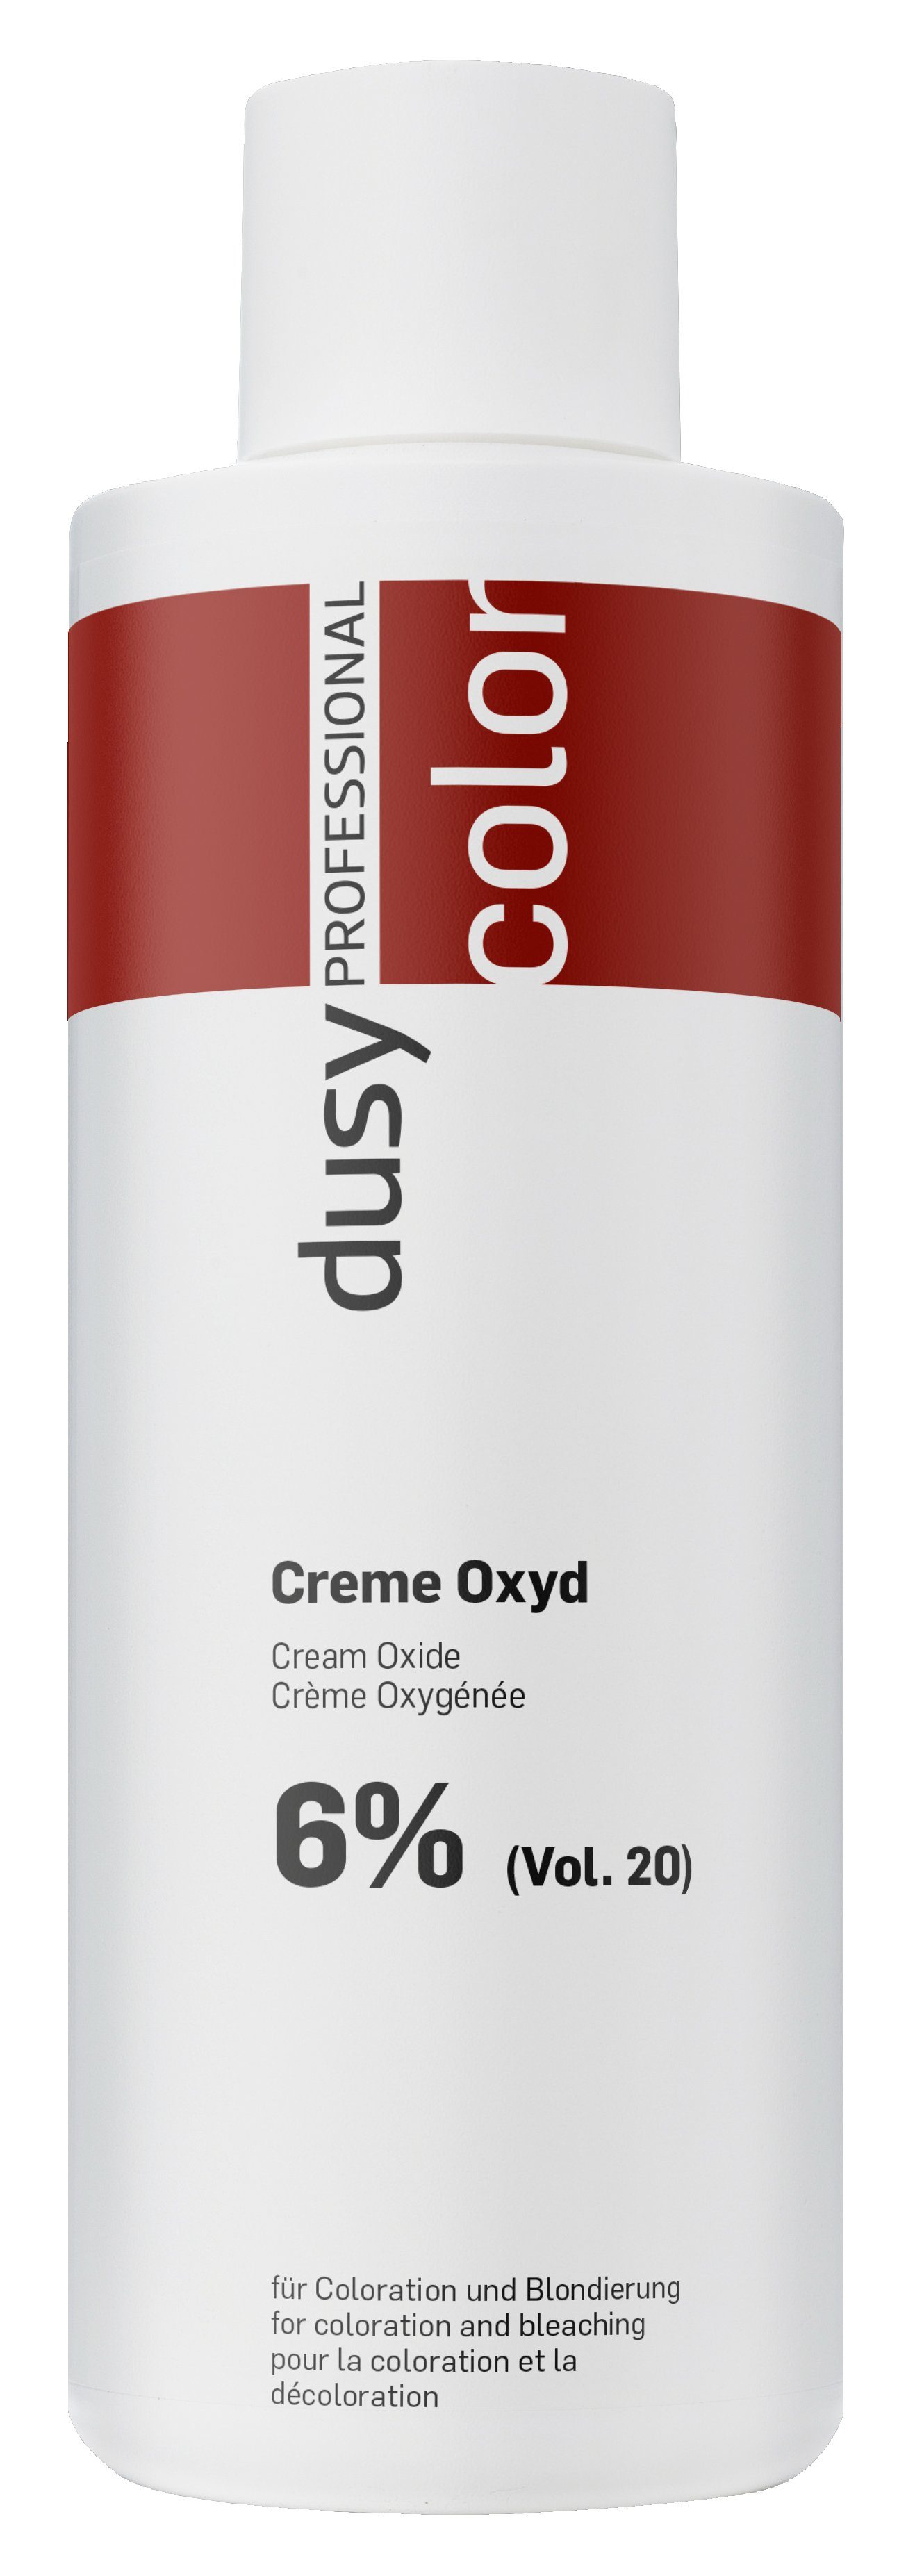 Professional 1000ml Haarfarbe Professional Dusy Oxyd Creme Dusy